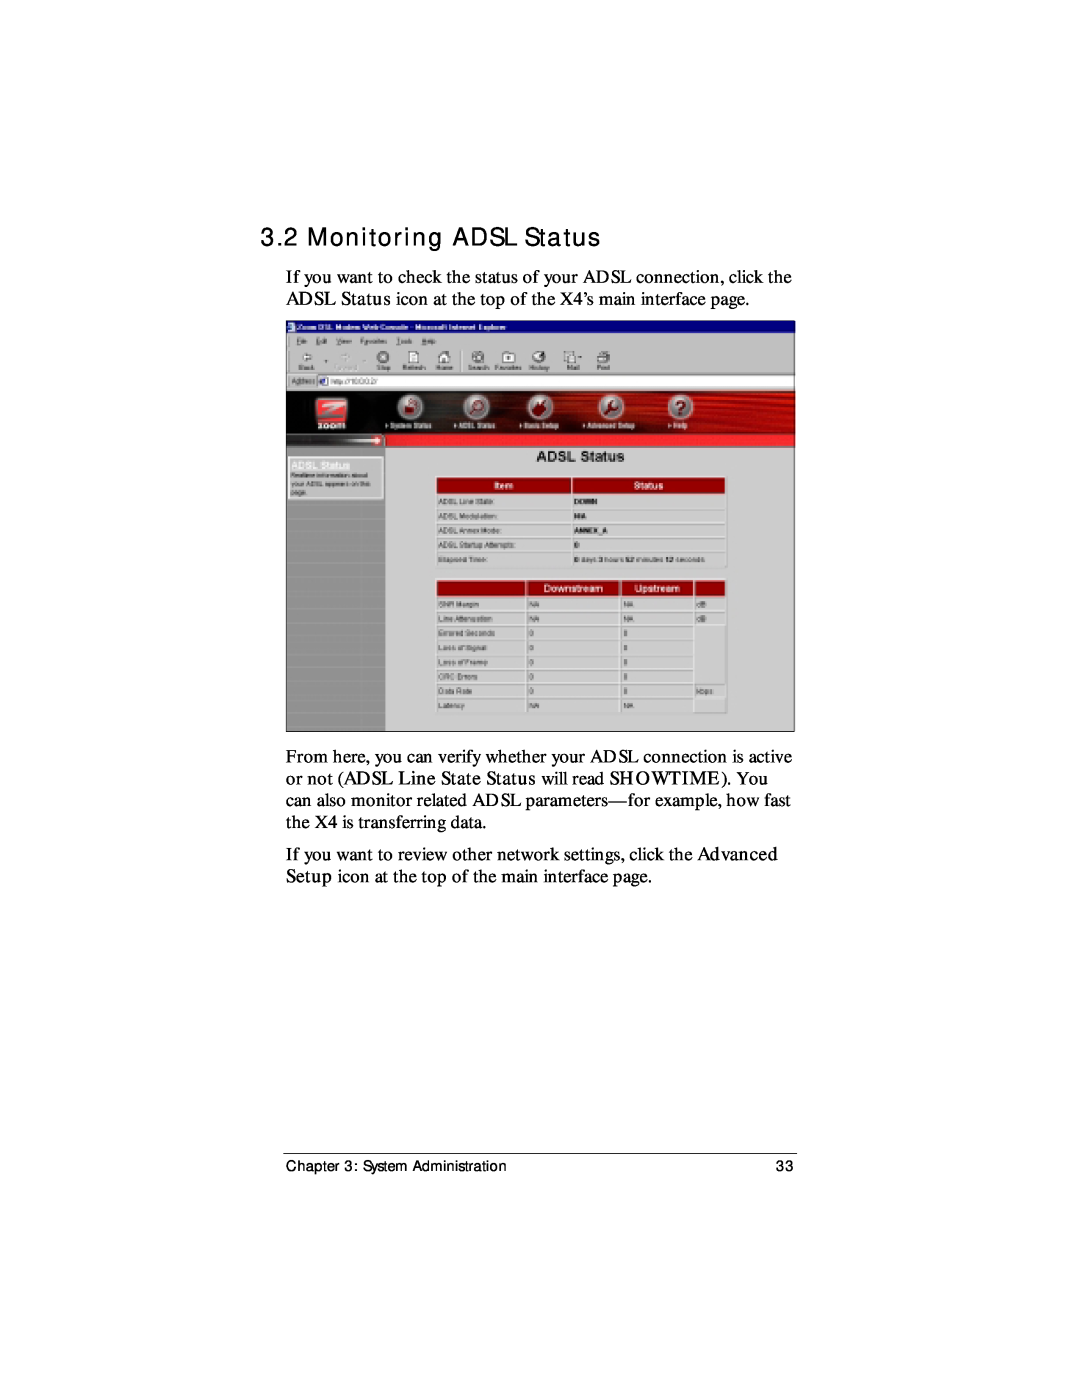 Zoom X4 manual Monitoring ADSL Status, System Administration 